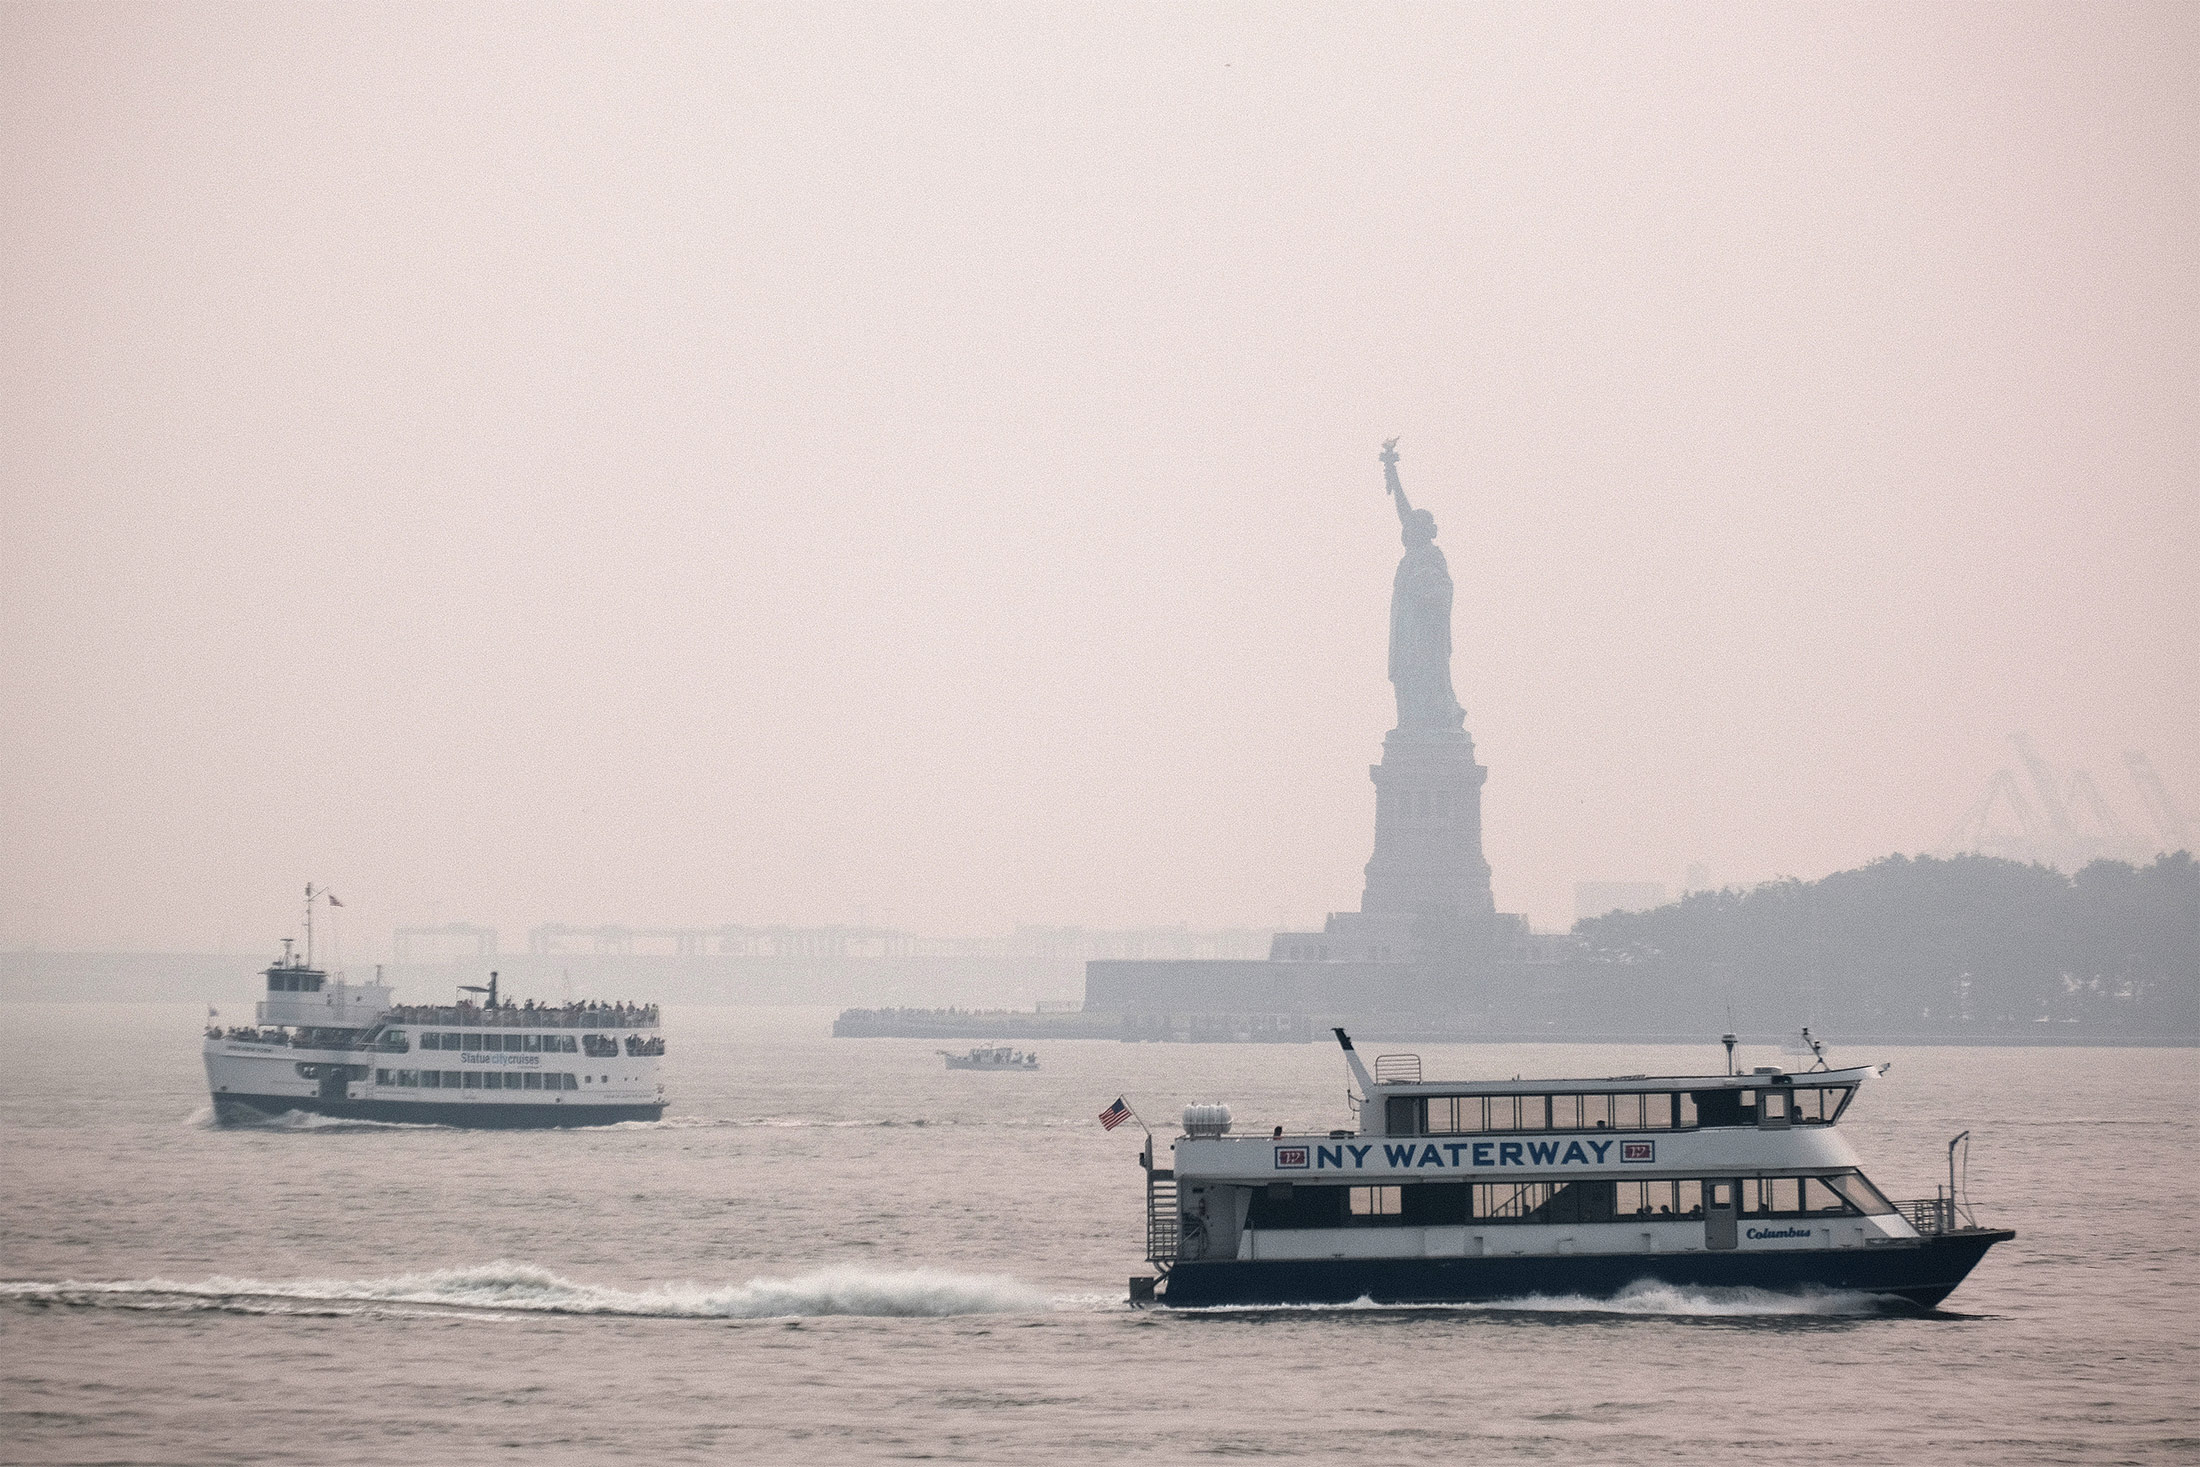 According to data from the National Oceanic and Atmospheric Administration, wildfire smoke from the U.S. West arrived in the New York area this week, creating decreased visibility and a foreboding haze.